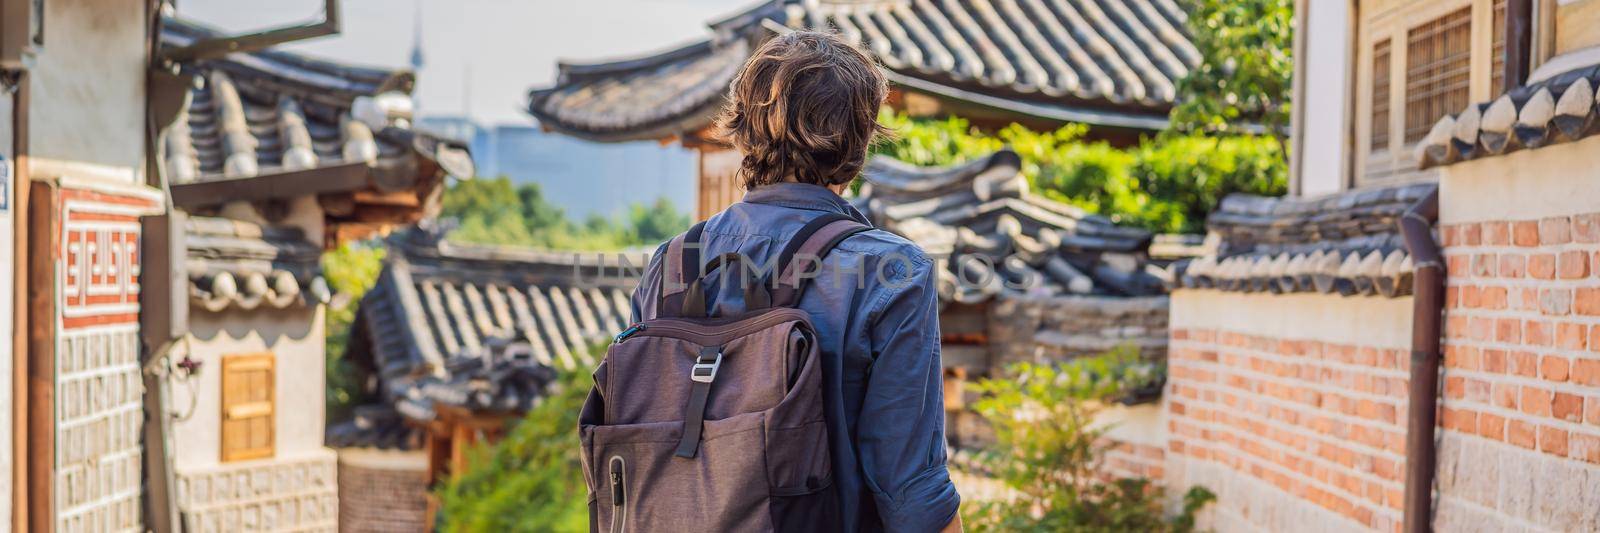 Young man tourist in Bukchon Hanok Village is one of the famous place for Korean traditional houses have been preserved. Travel to Korea Concept. BANNER, LONG FORMAT